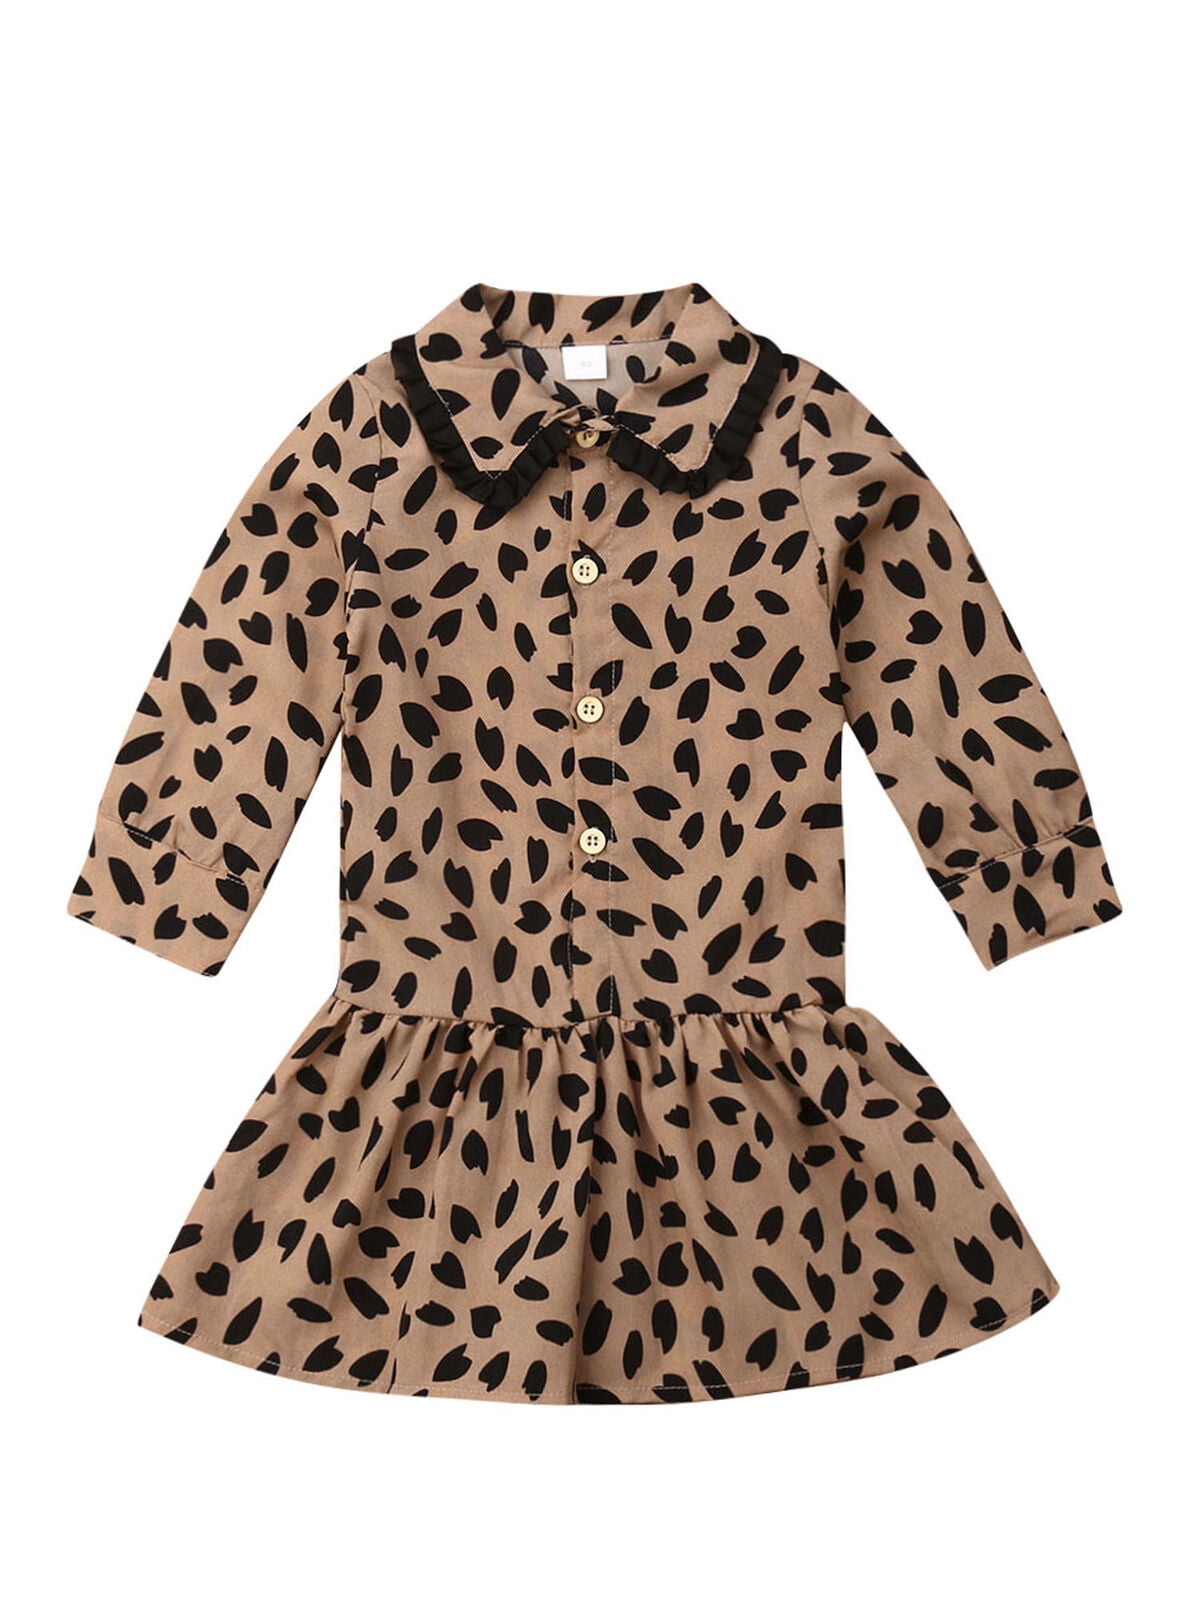 Kids Toddler Baby Girl Leopard Long Sleeve Casual Party Pageant Princess Dresses 